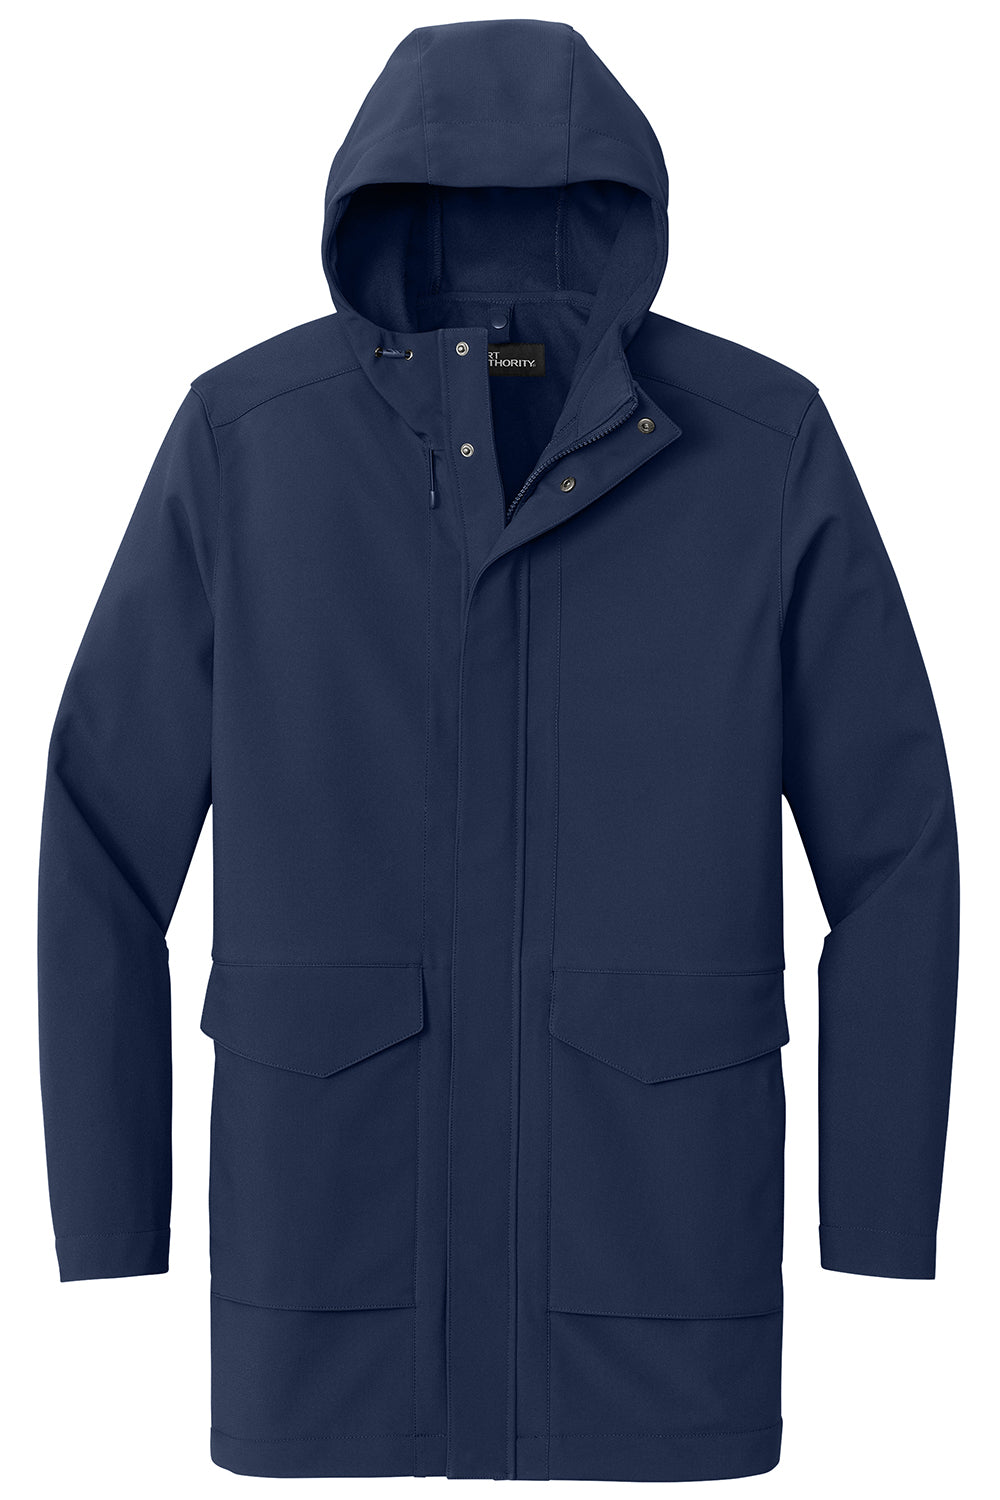 Port Authority J919 Mens Collective Full Zip Hooded Parka River Navy Blue Flat Front